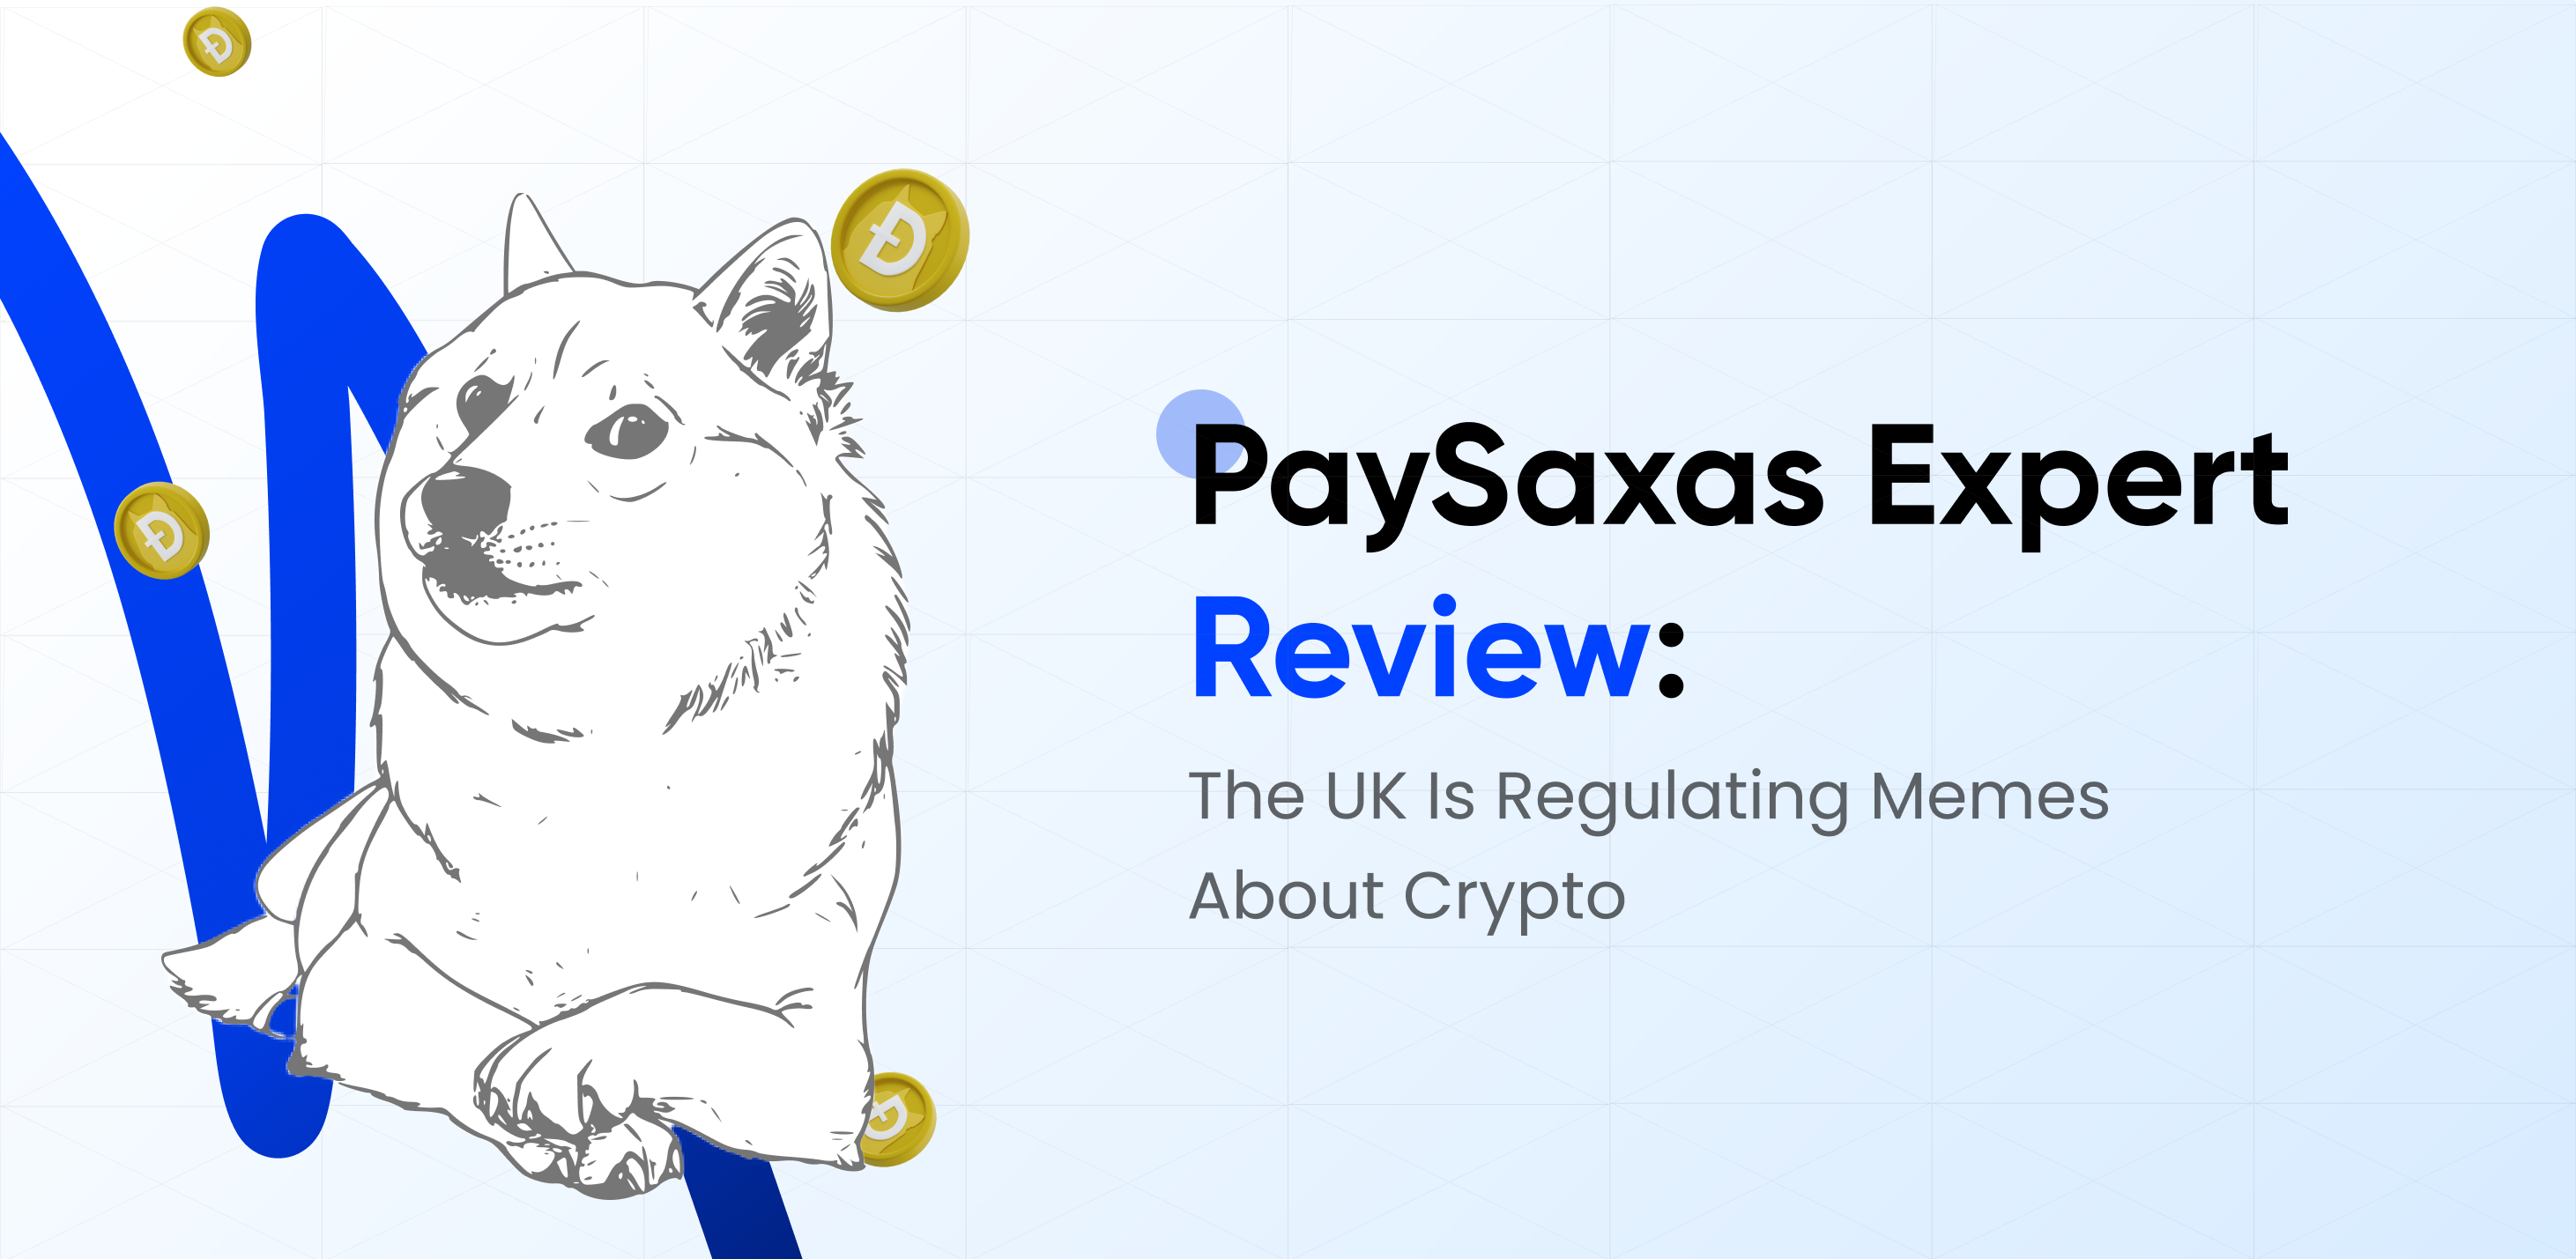 PaySaxas Expert Review: The UK Is Regulating Memes About Crypto